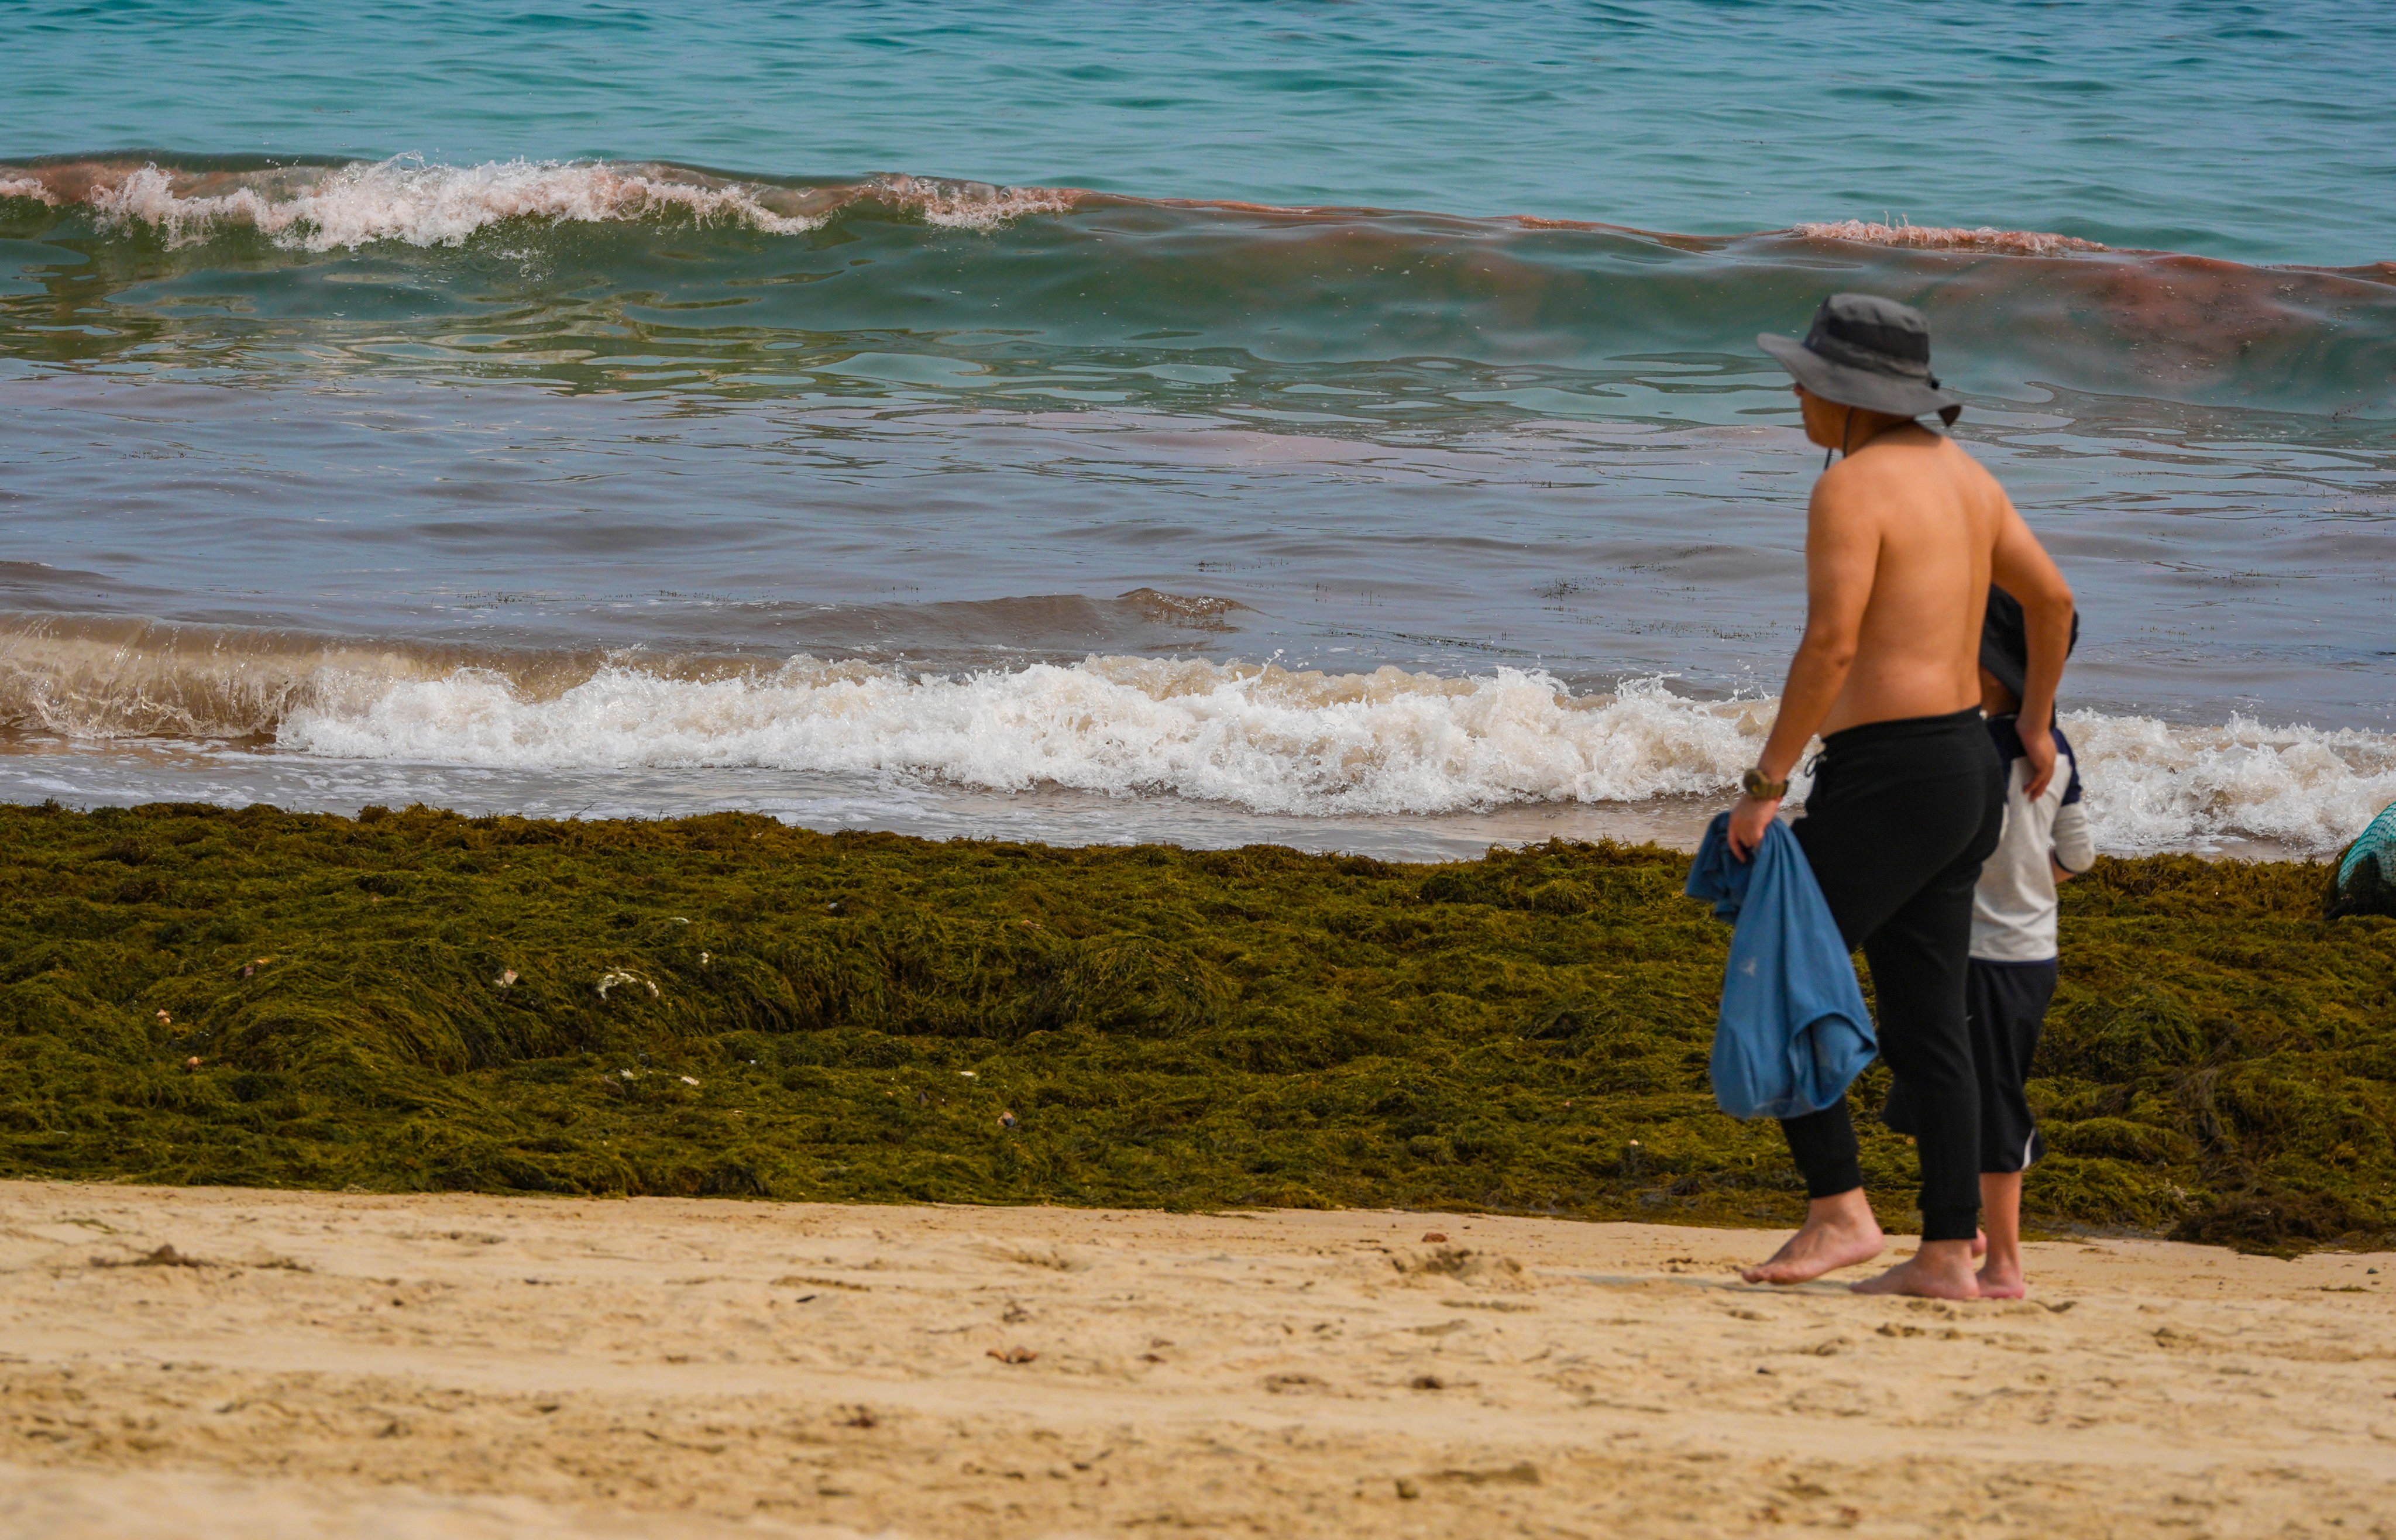 A red tide blooms at Shek O Beach last month. Photo: Eugene Lee